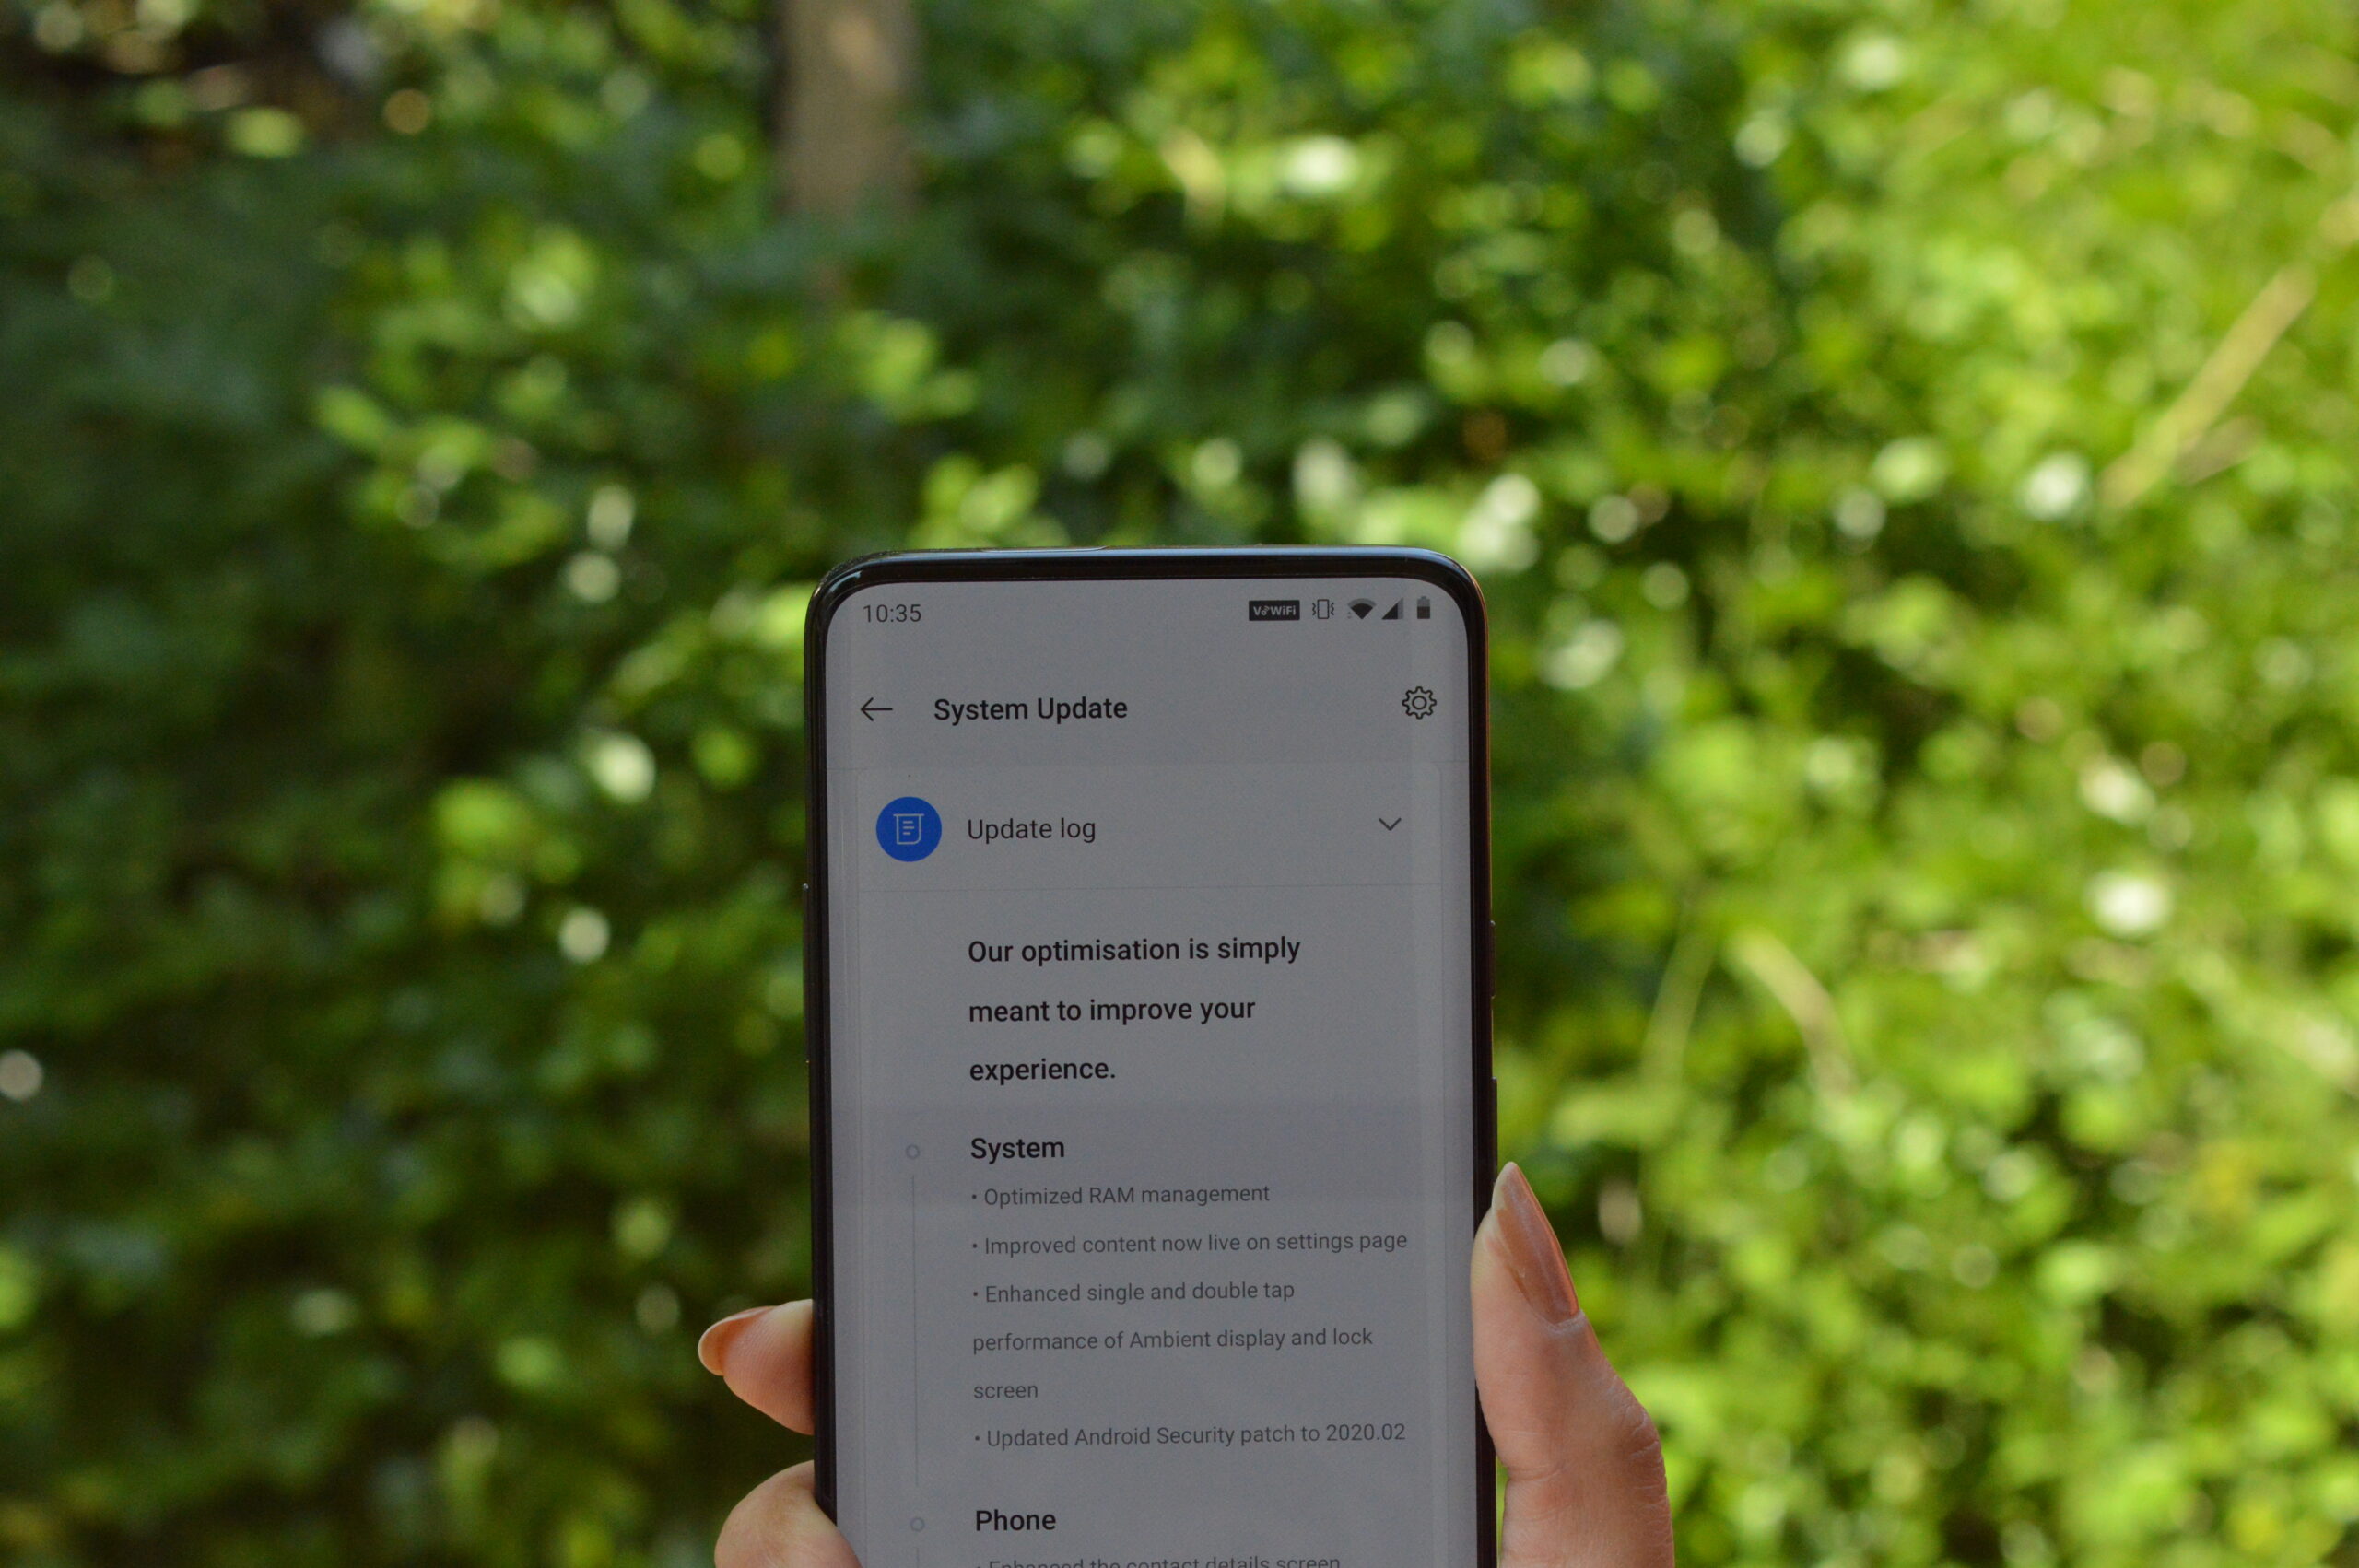 OxygenOS Open Beta 10 Update For Oneplus 7/7Pro With February 2020 Security Patch